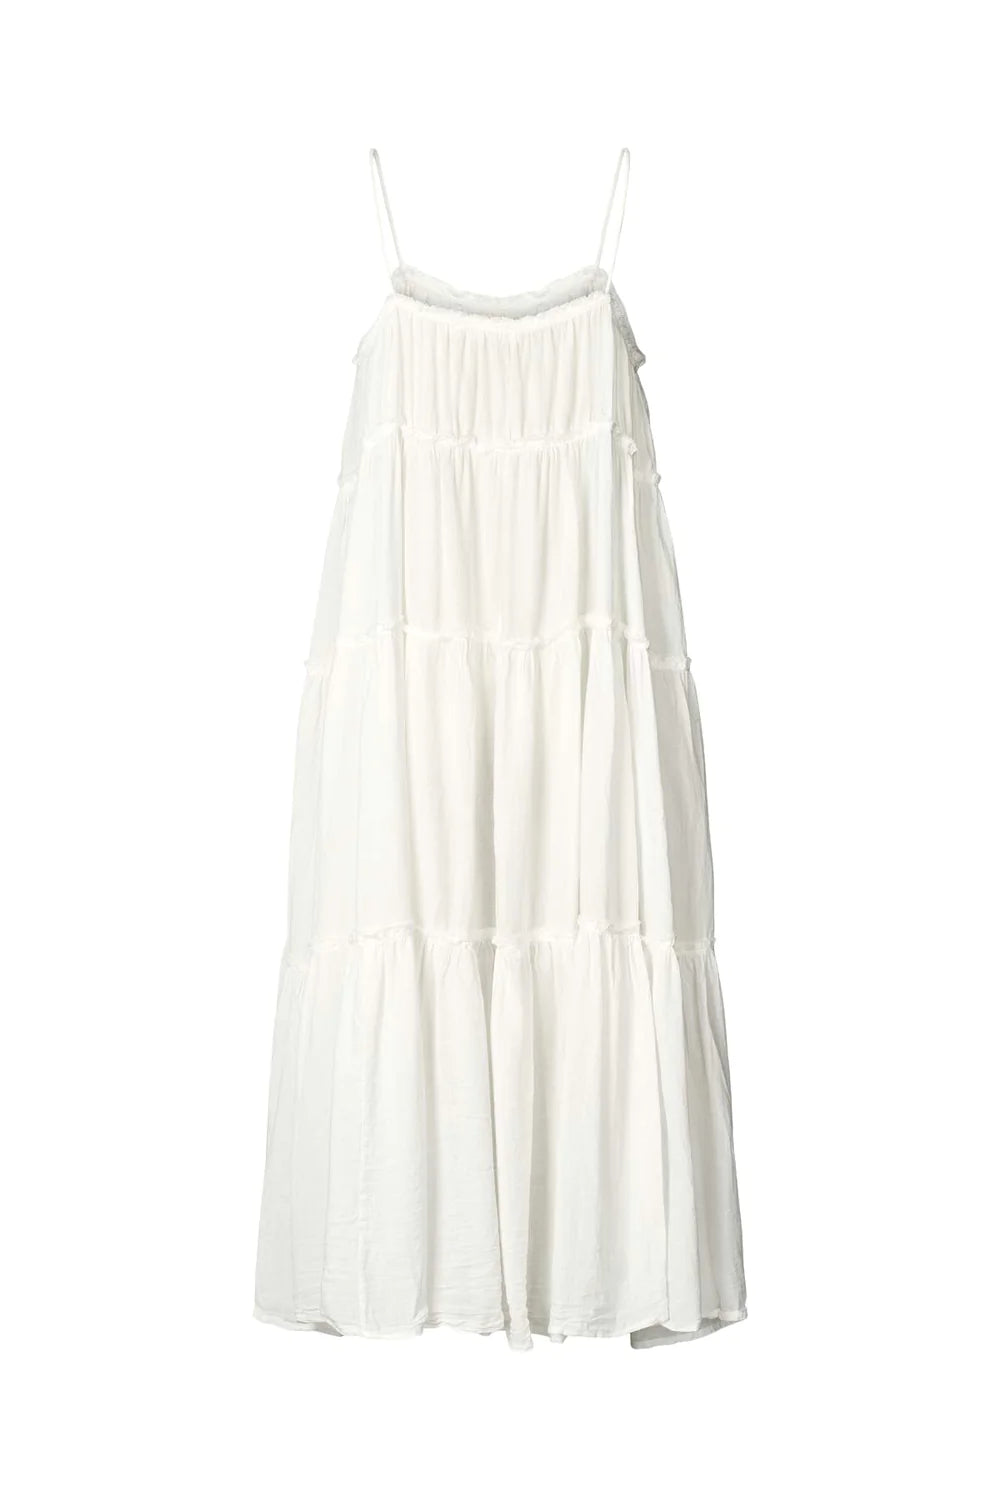 Cotton string dress juvel in white by Rabens Saloner